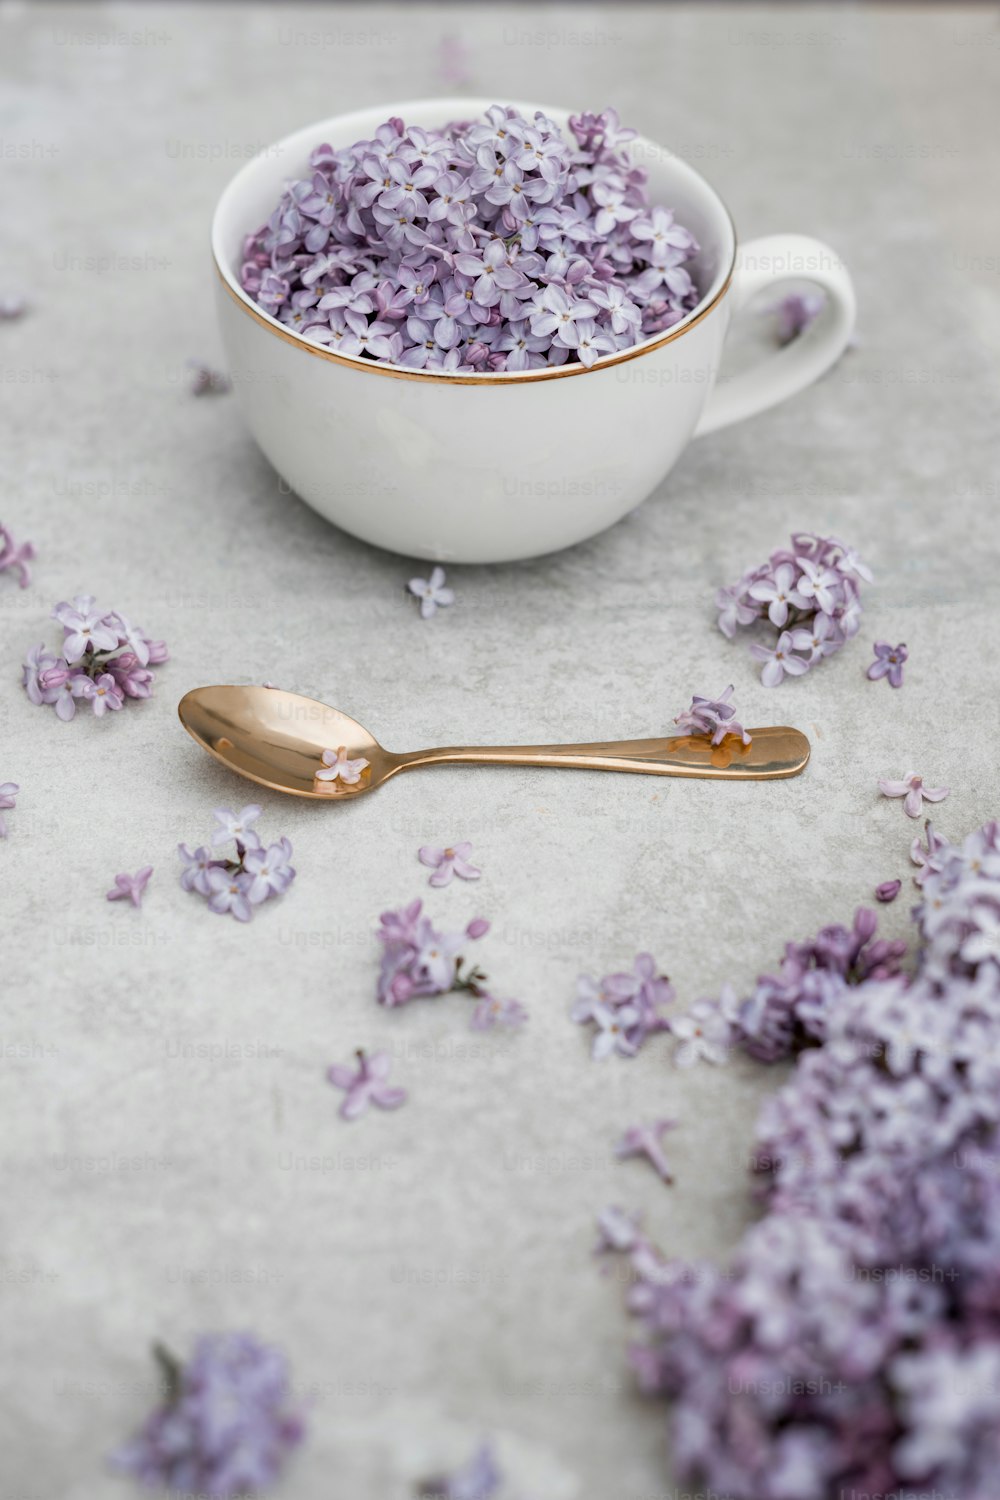 a white bowl filled with purple flowers next to a spoon